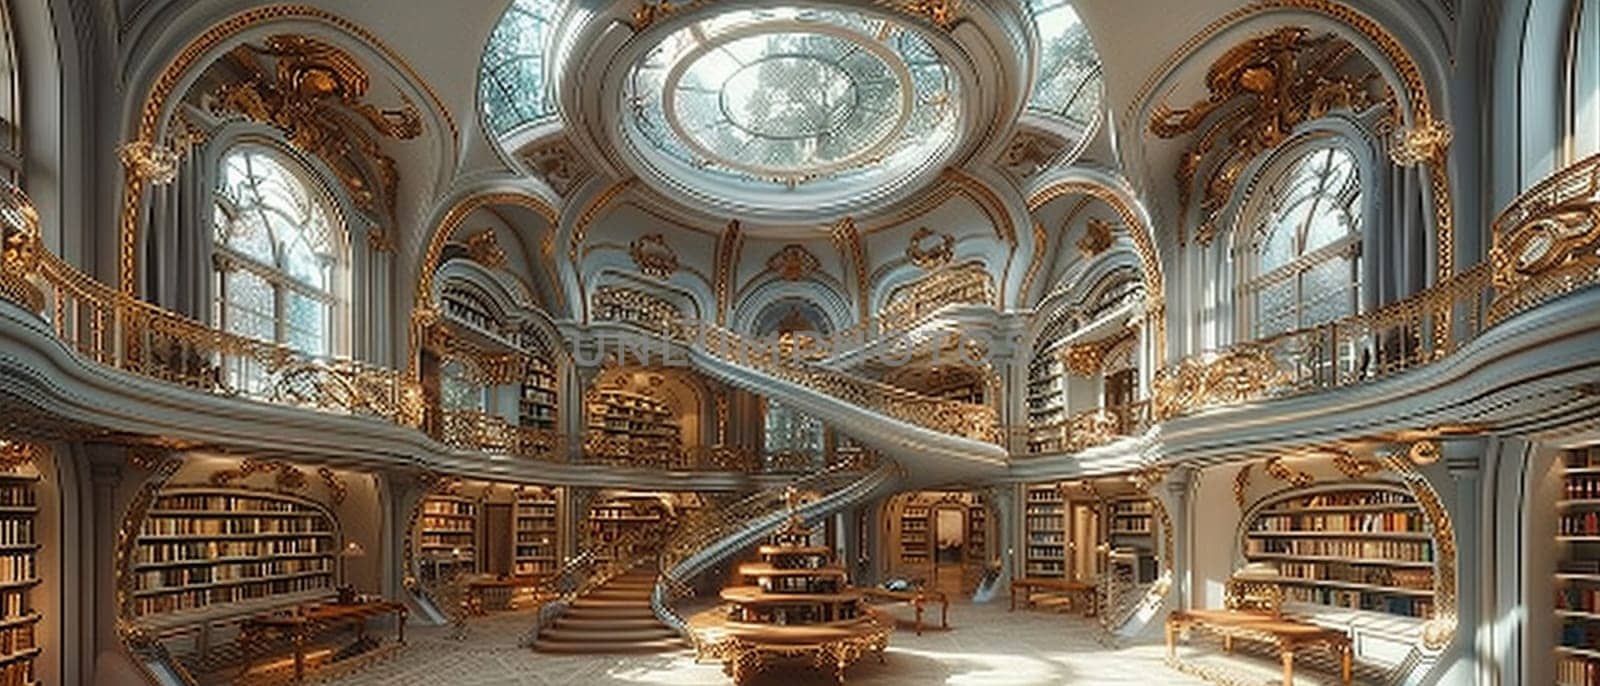 Grand library with a spiral staircase and domed ceiling.